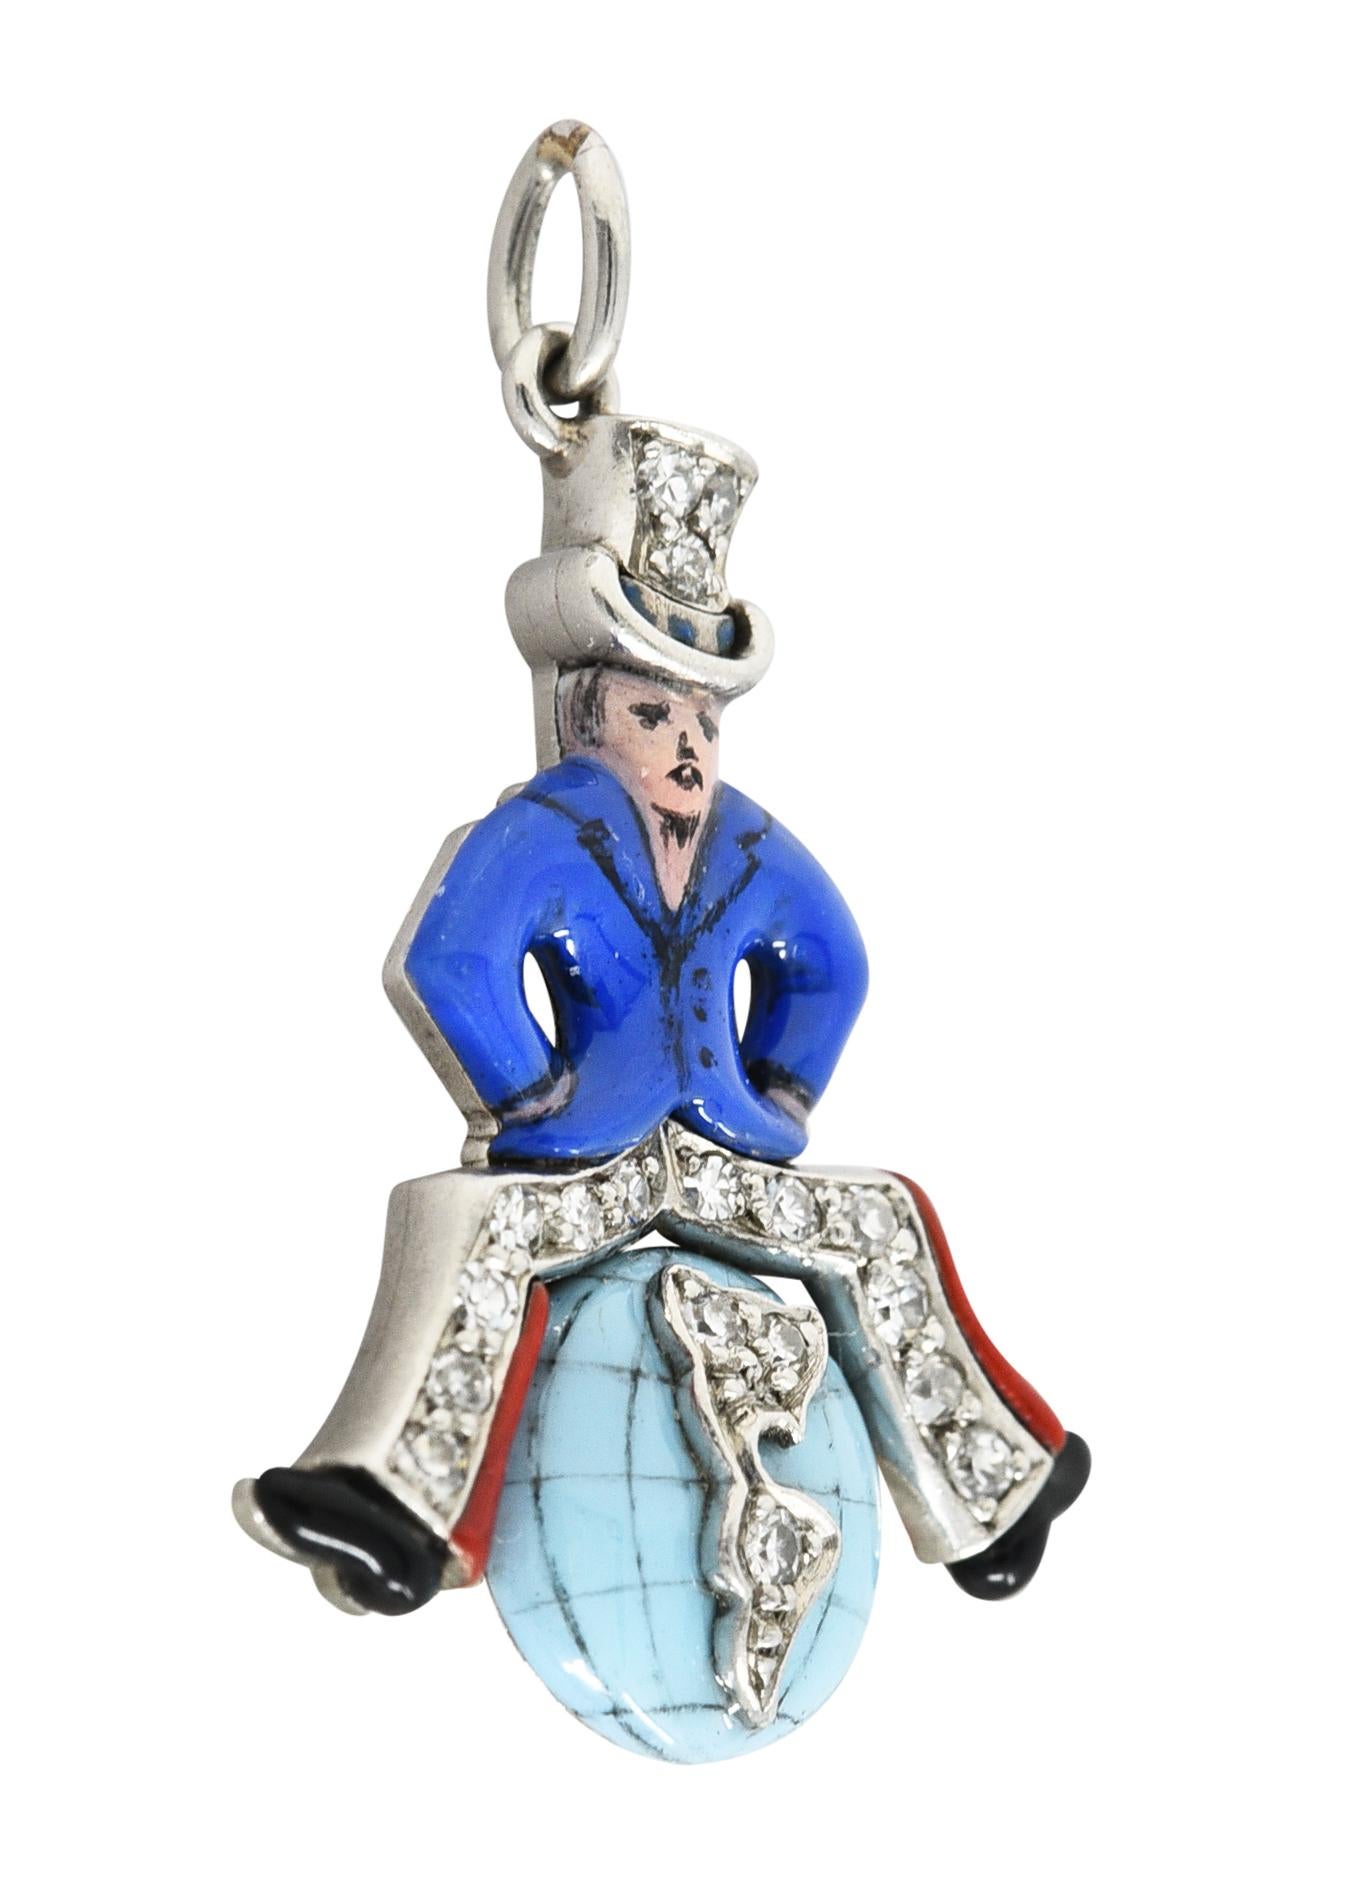 Designed as an Uncle Sam figure sitting atop a globe centering North and South America

Wearing a top hat, flared pants, and blue coat with enamel throughout

Opaque glossy royal blue, pastel blue, red and black - minimal loss consistent with